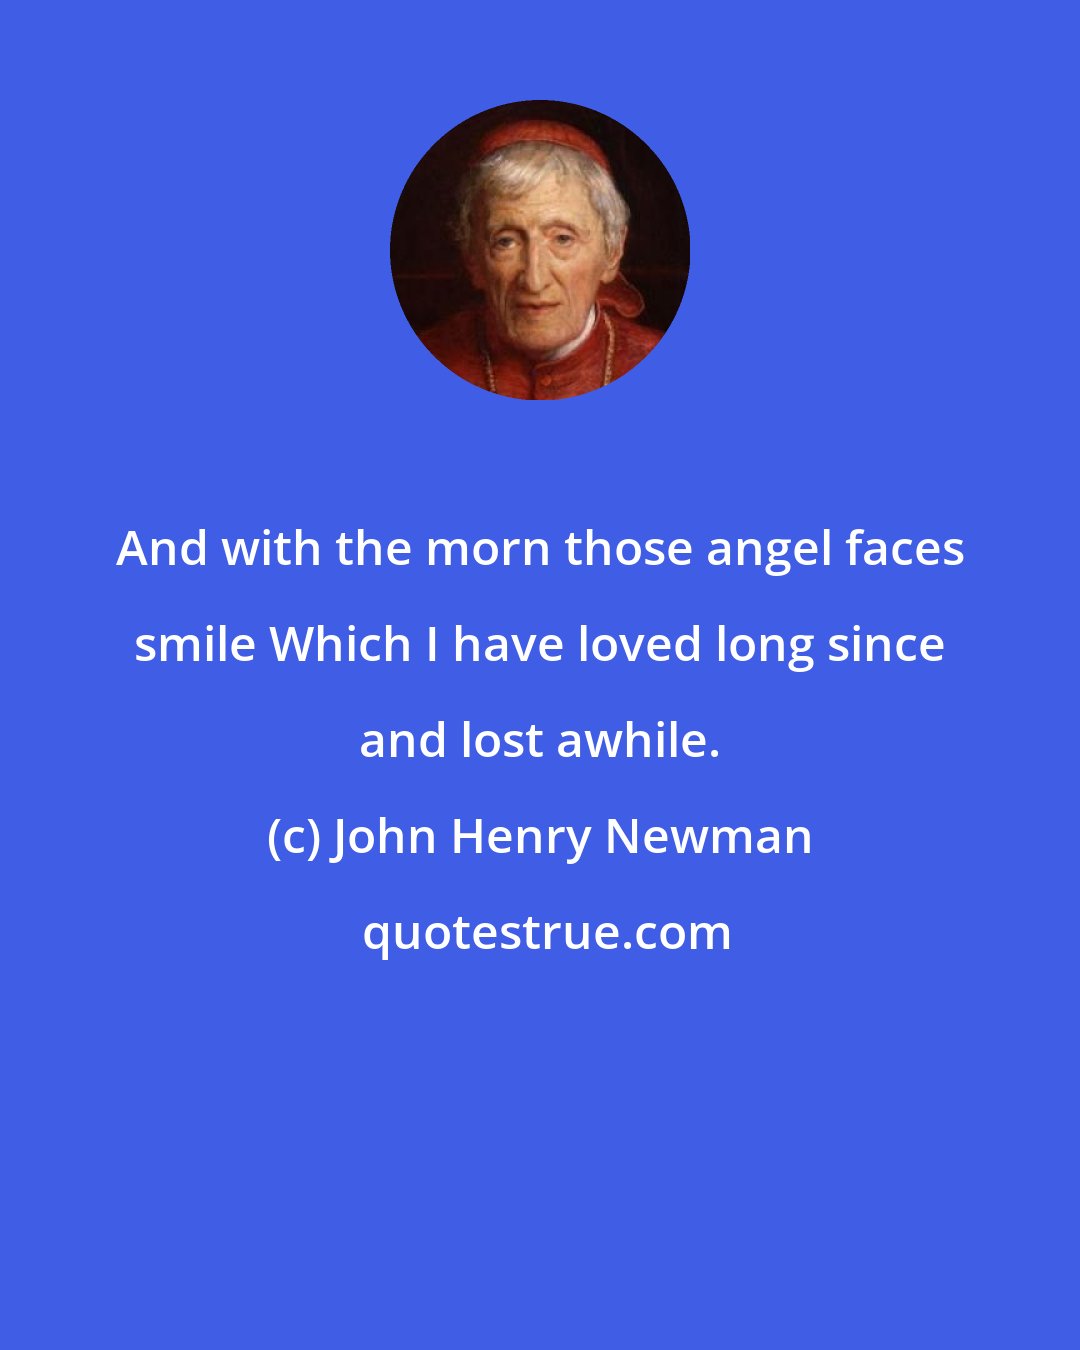 John Henry Newman: And with the morn those angel faces smile Which I have loved long since and lost awhile.